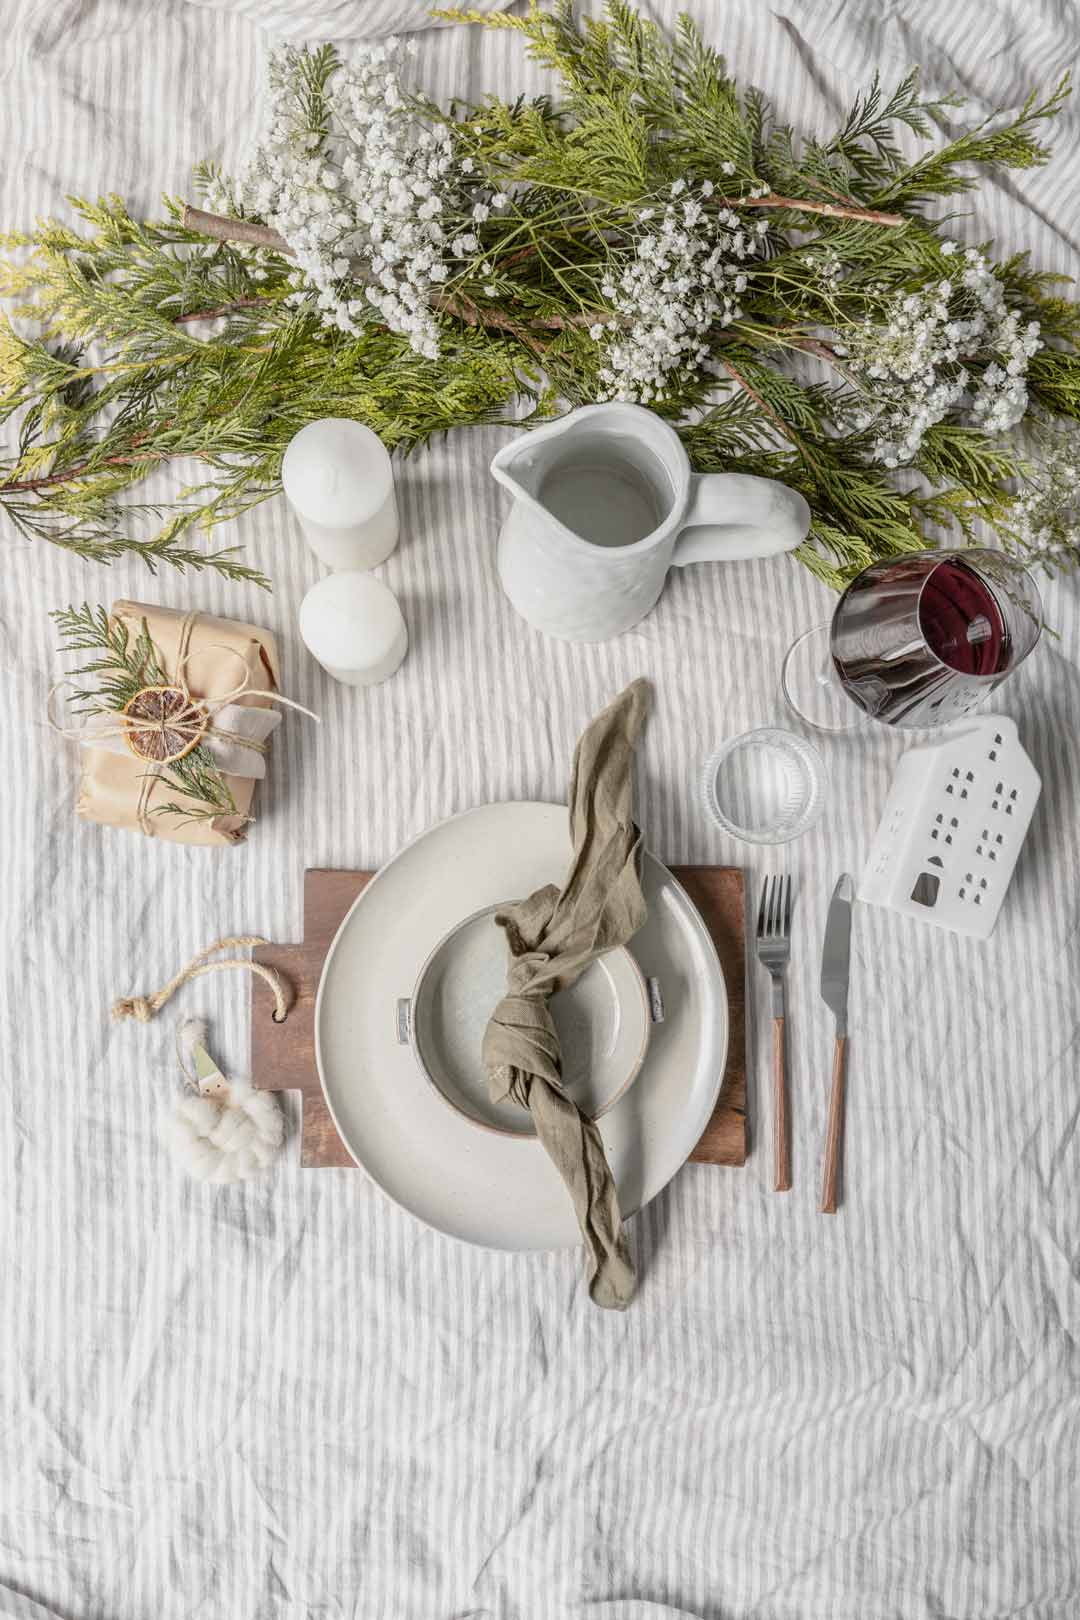 A cottagecore farmhouse inspired table setting for your Christmas lunch or dinner how to se your table for Christmas using natural elements and brown paper wrapped gift